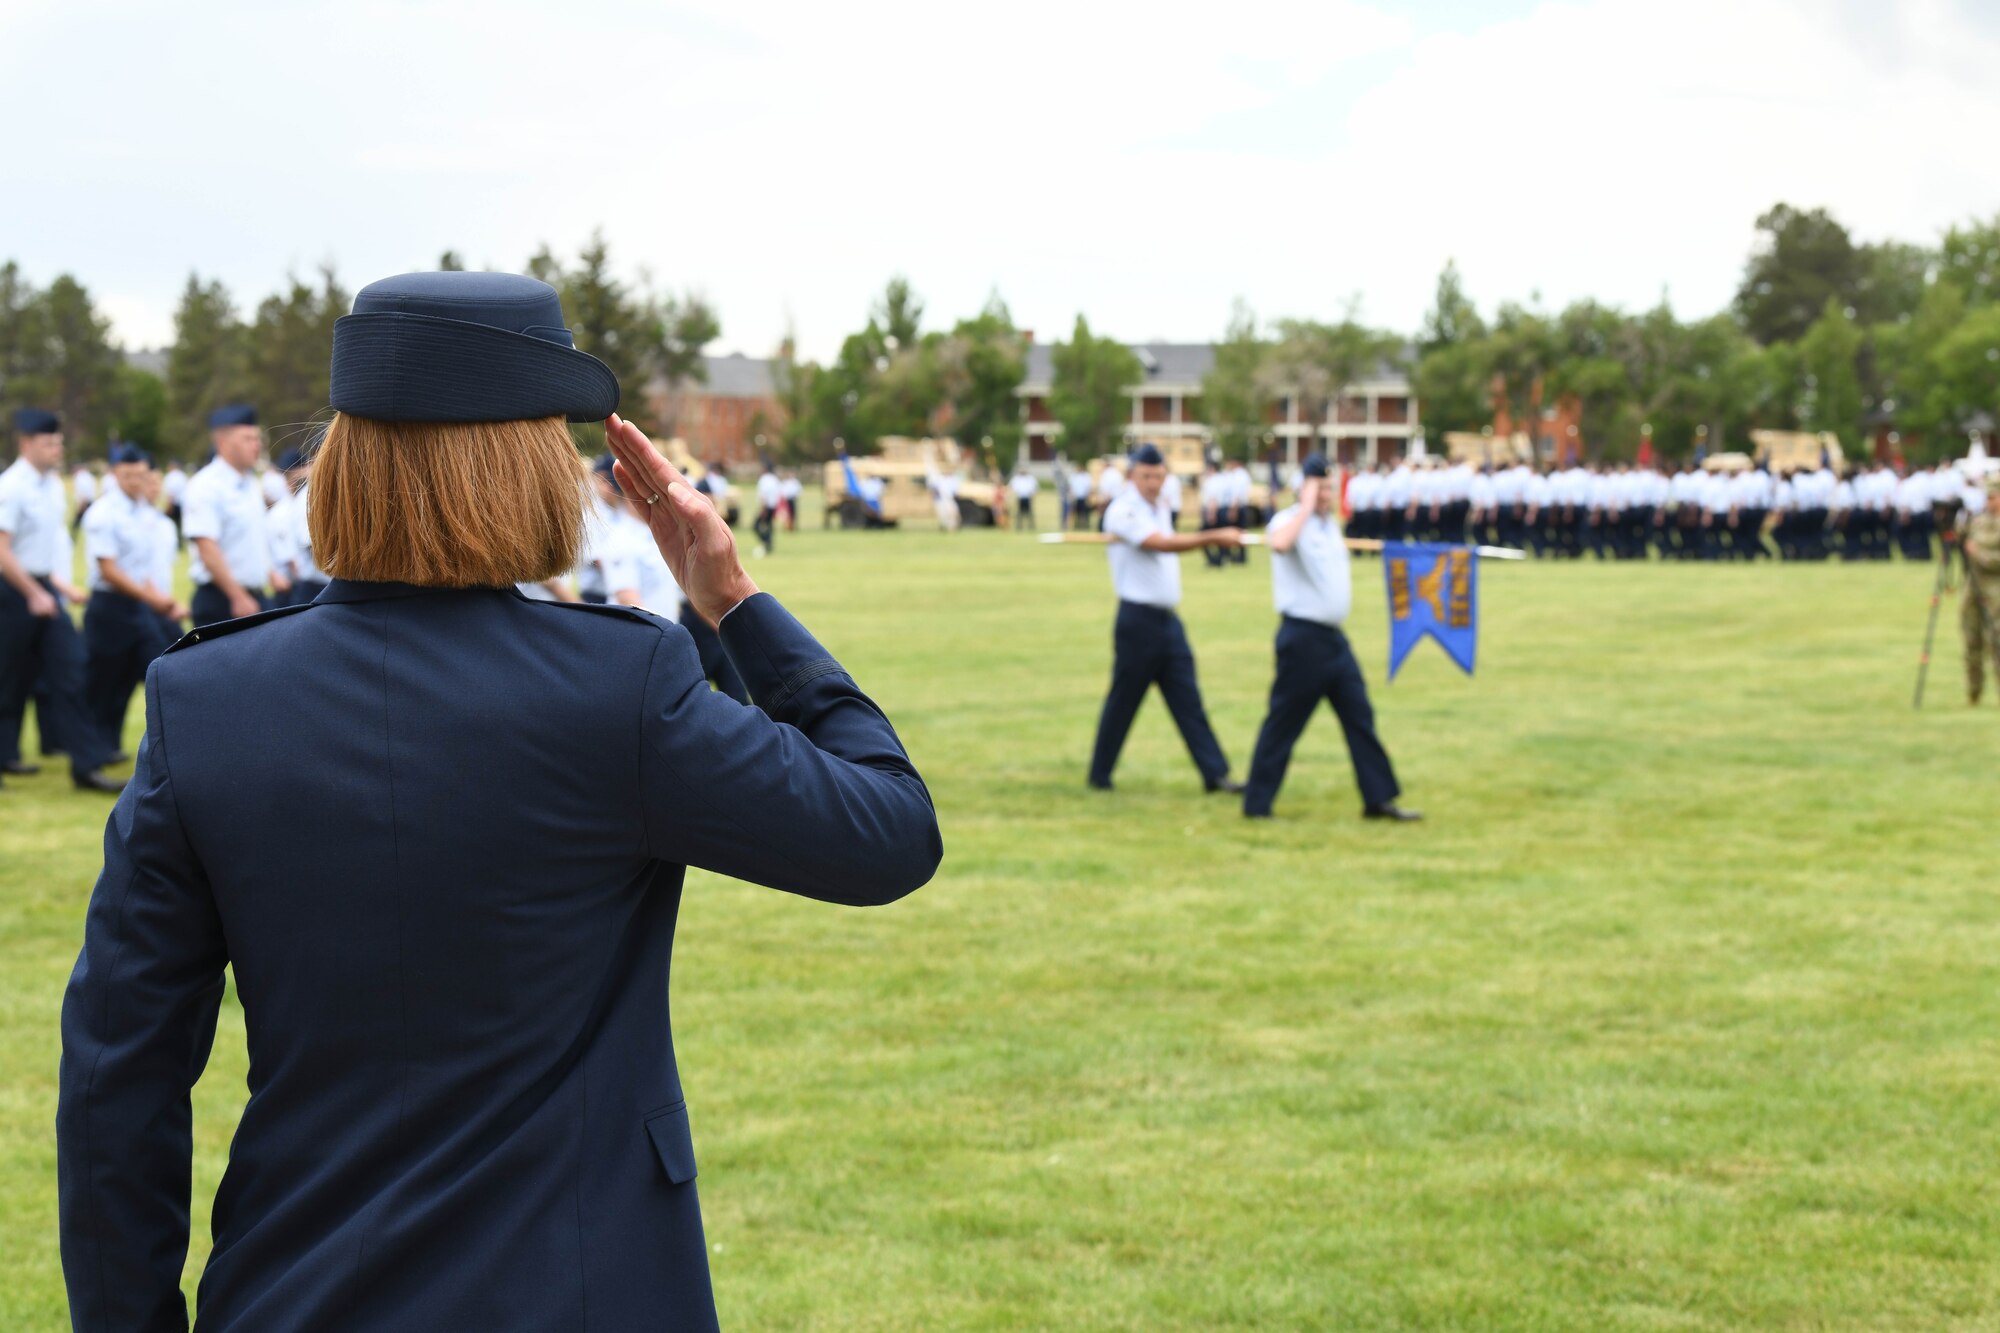 The ceremony signified the transition of command from Col. Peter Bonetti to Col. Catherine Barrington. (U.S. Air Force photo by Airman 1st Class Anthony Munoz)